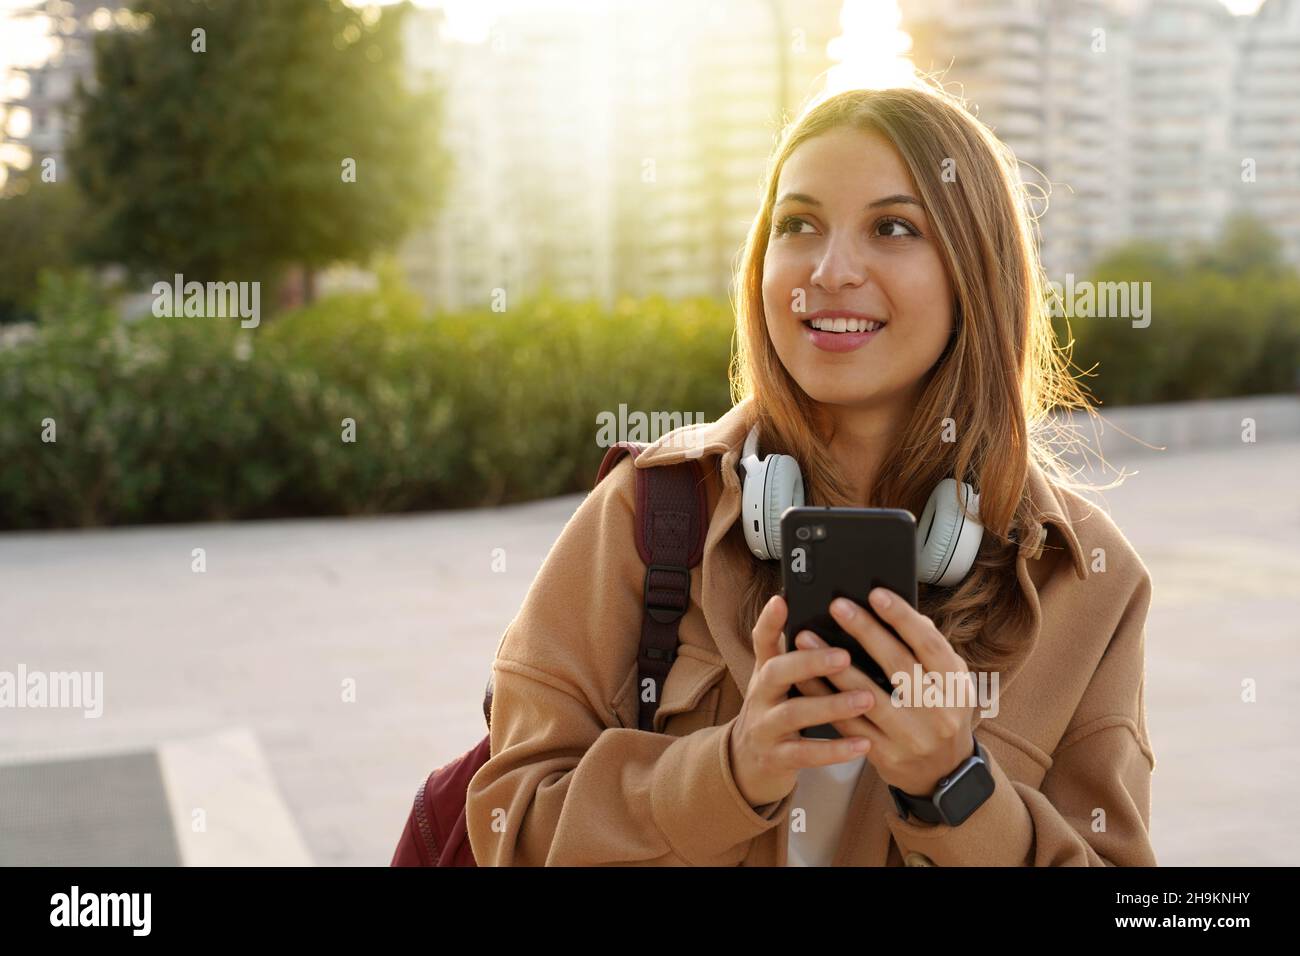 Cool modern teenage girl thinking and looking to the side holding smartphone outdoors. Copy space. Stock Photo